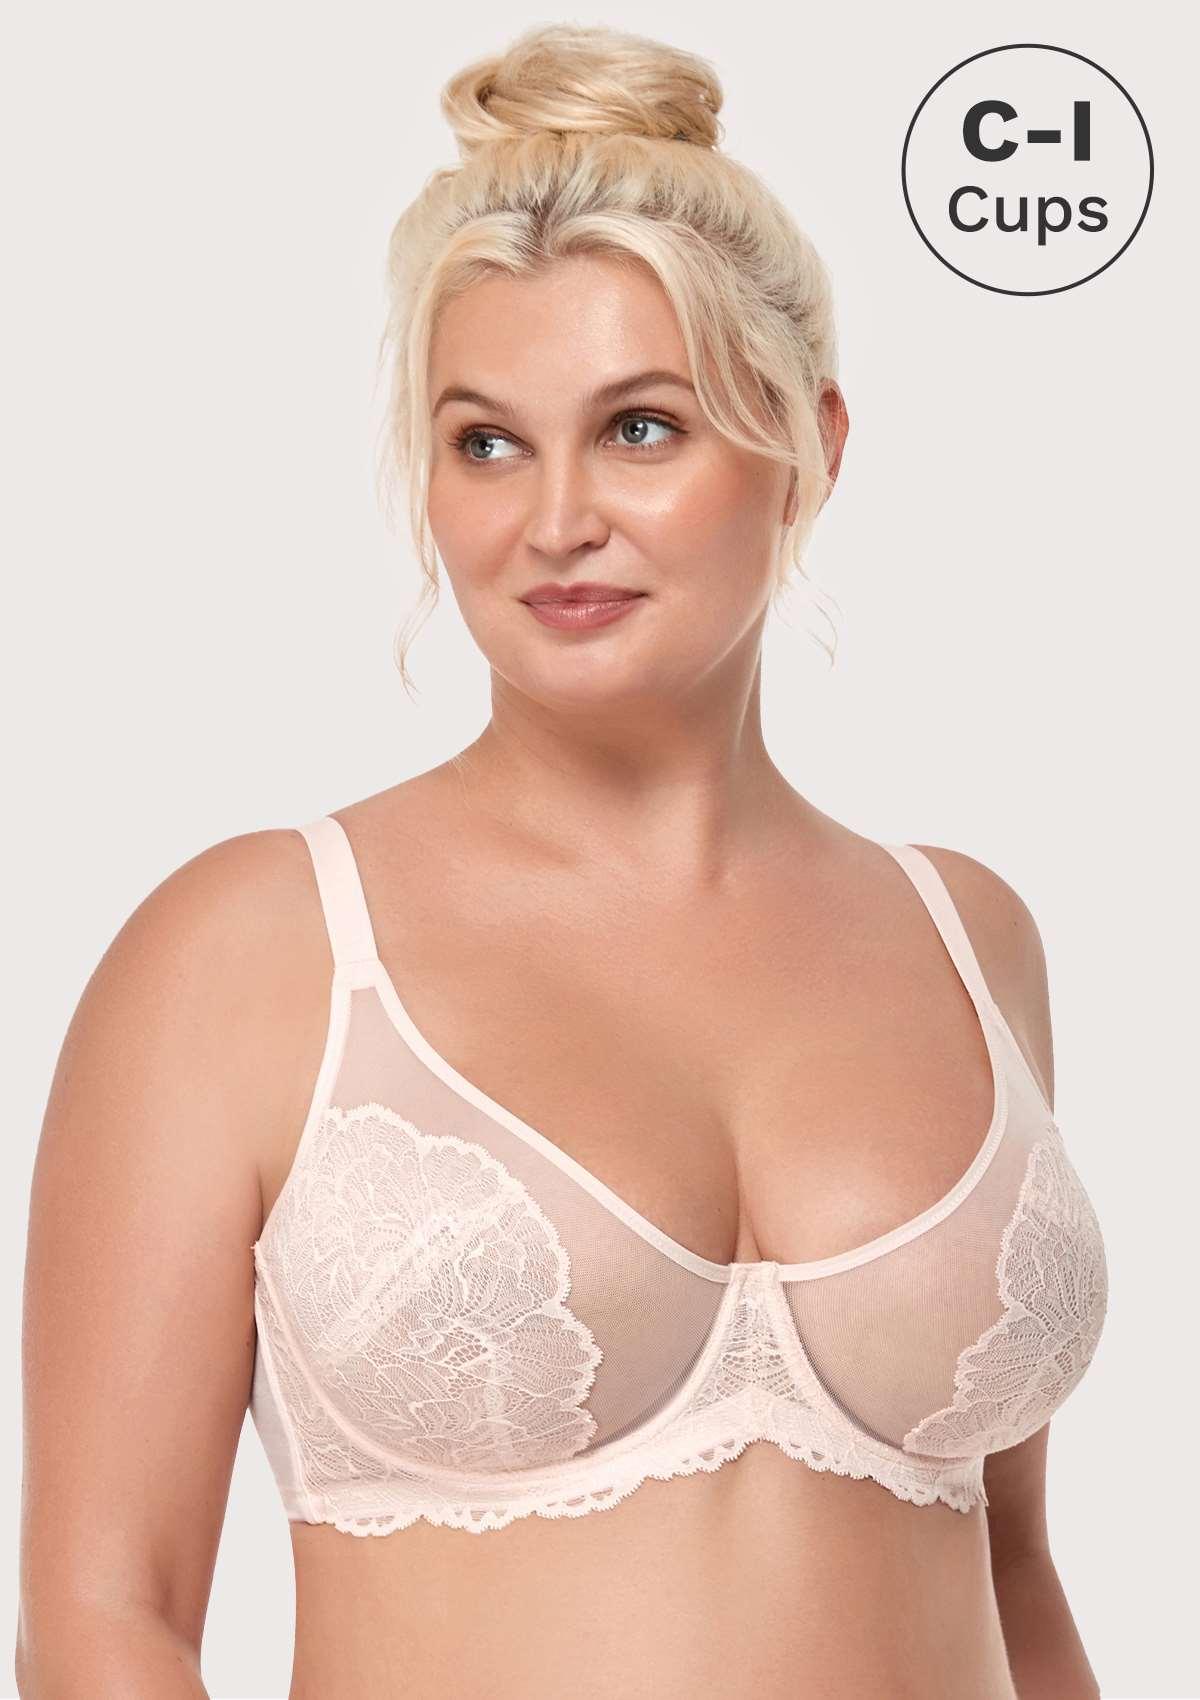 HSIA Blossom Matching Lacey Underwear And Bra Set: Sexy Lace Bra - Dusty Peach / 42 / D